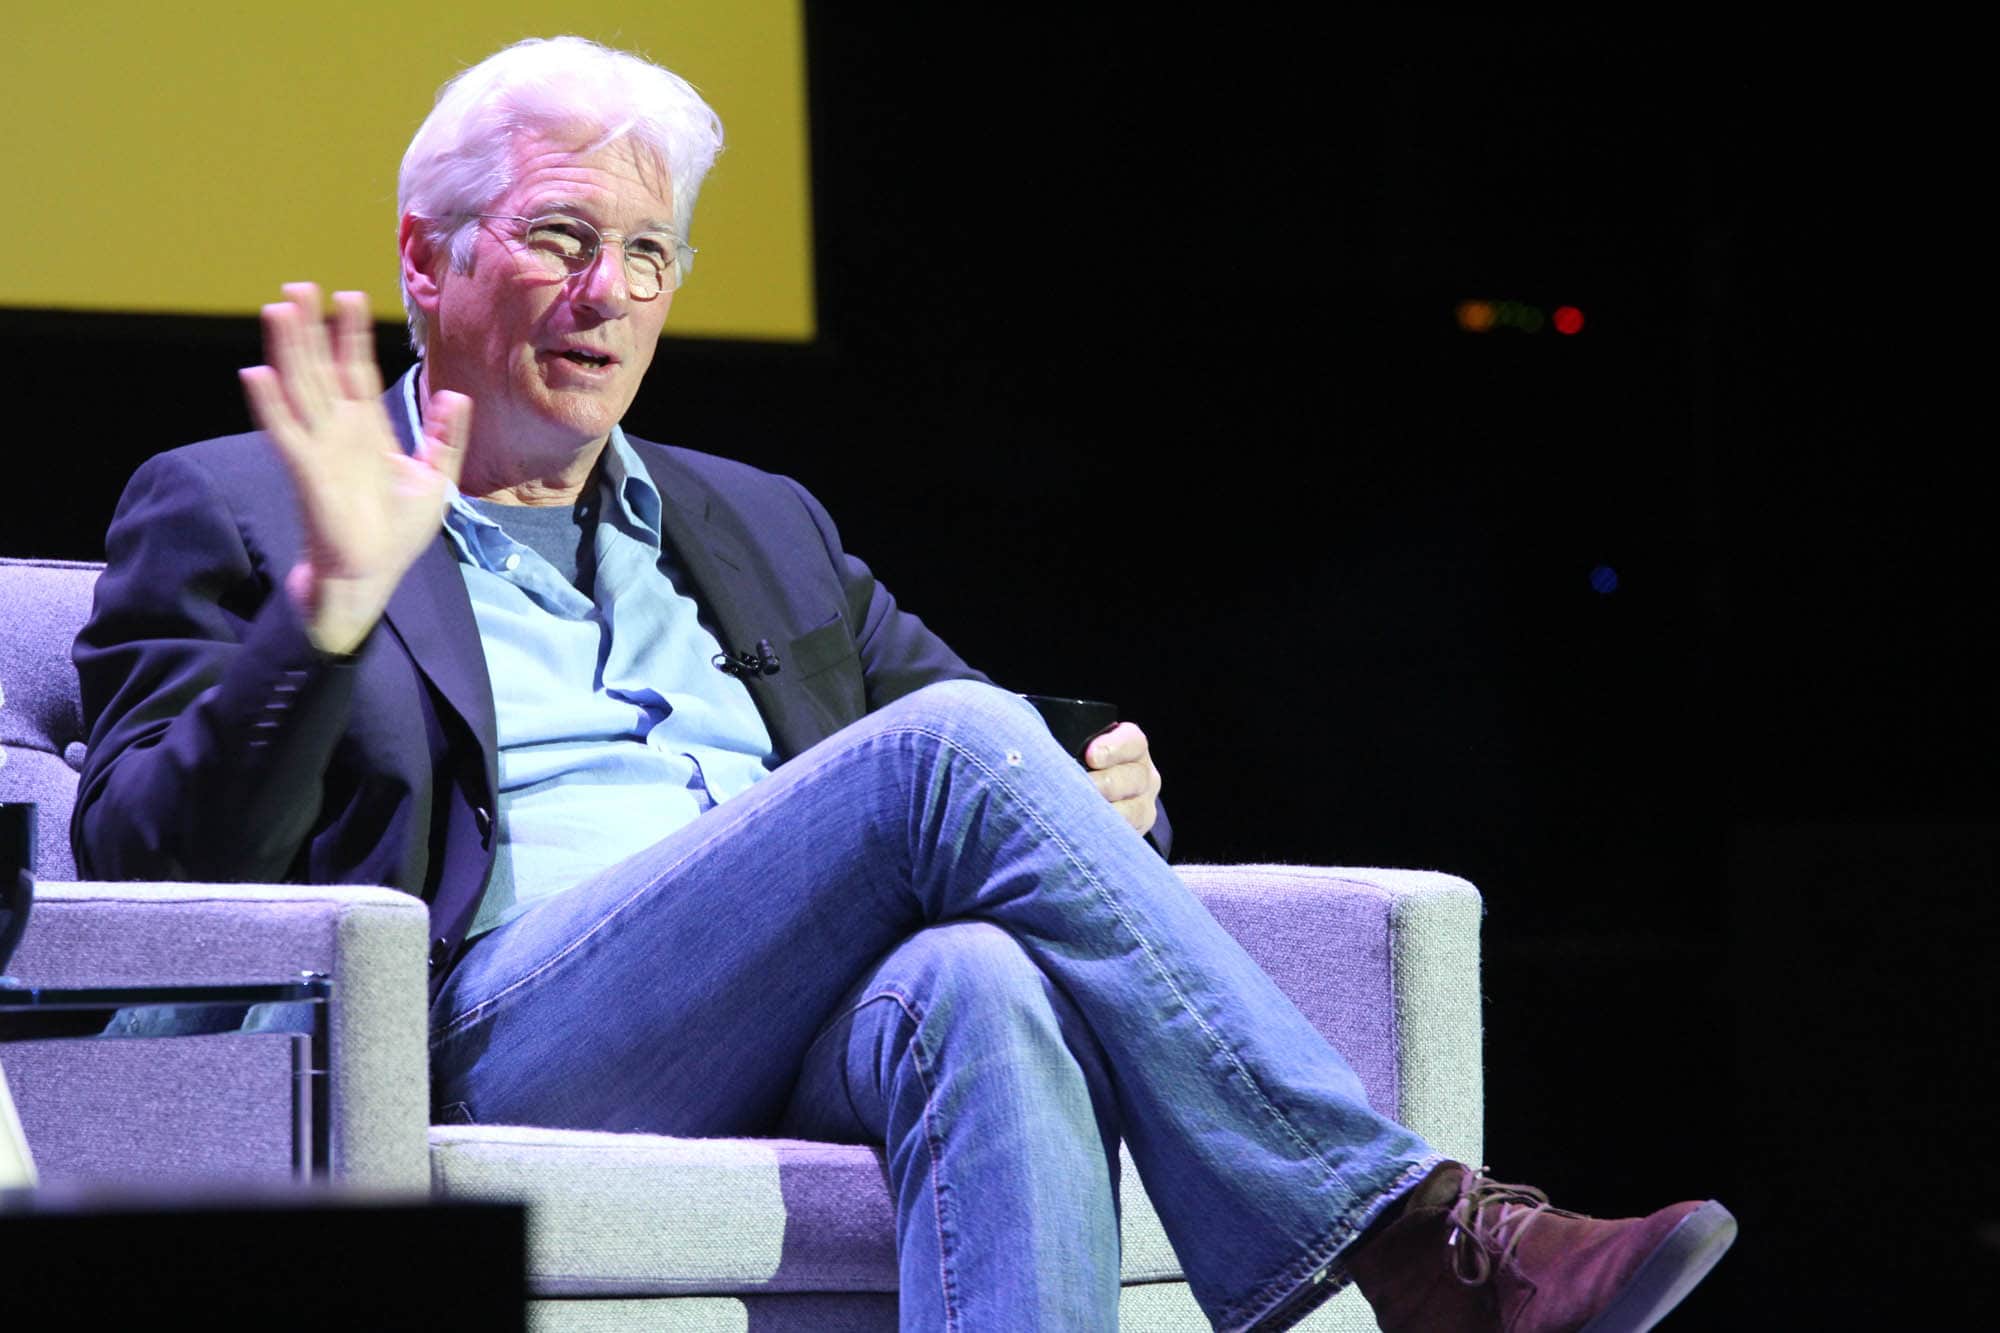 Actor Richard Gere speaking at event